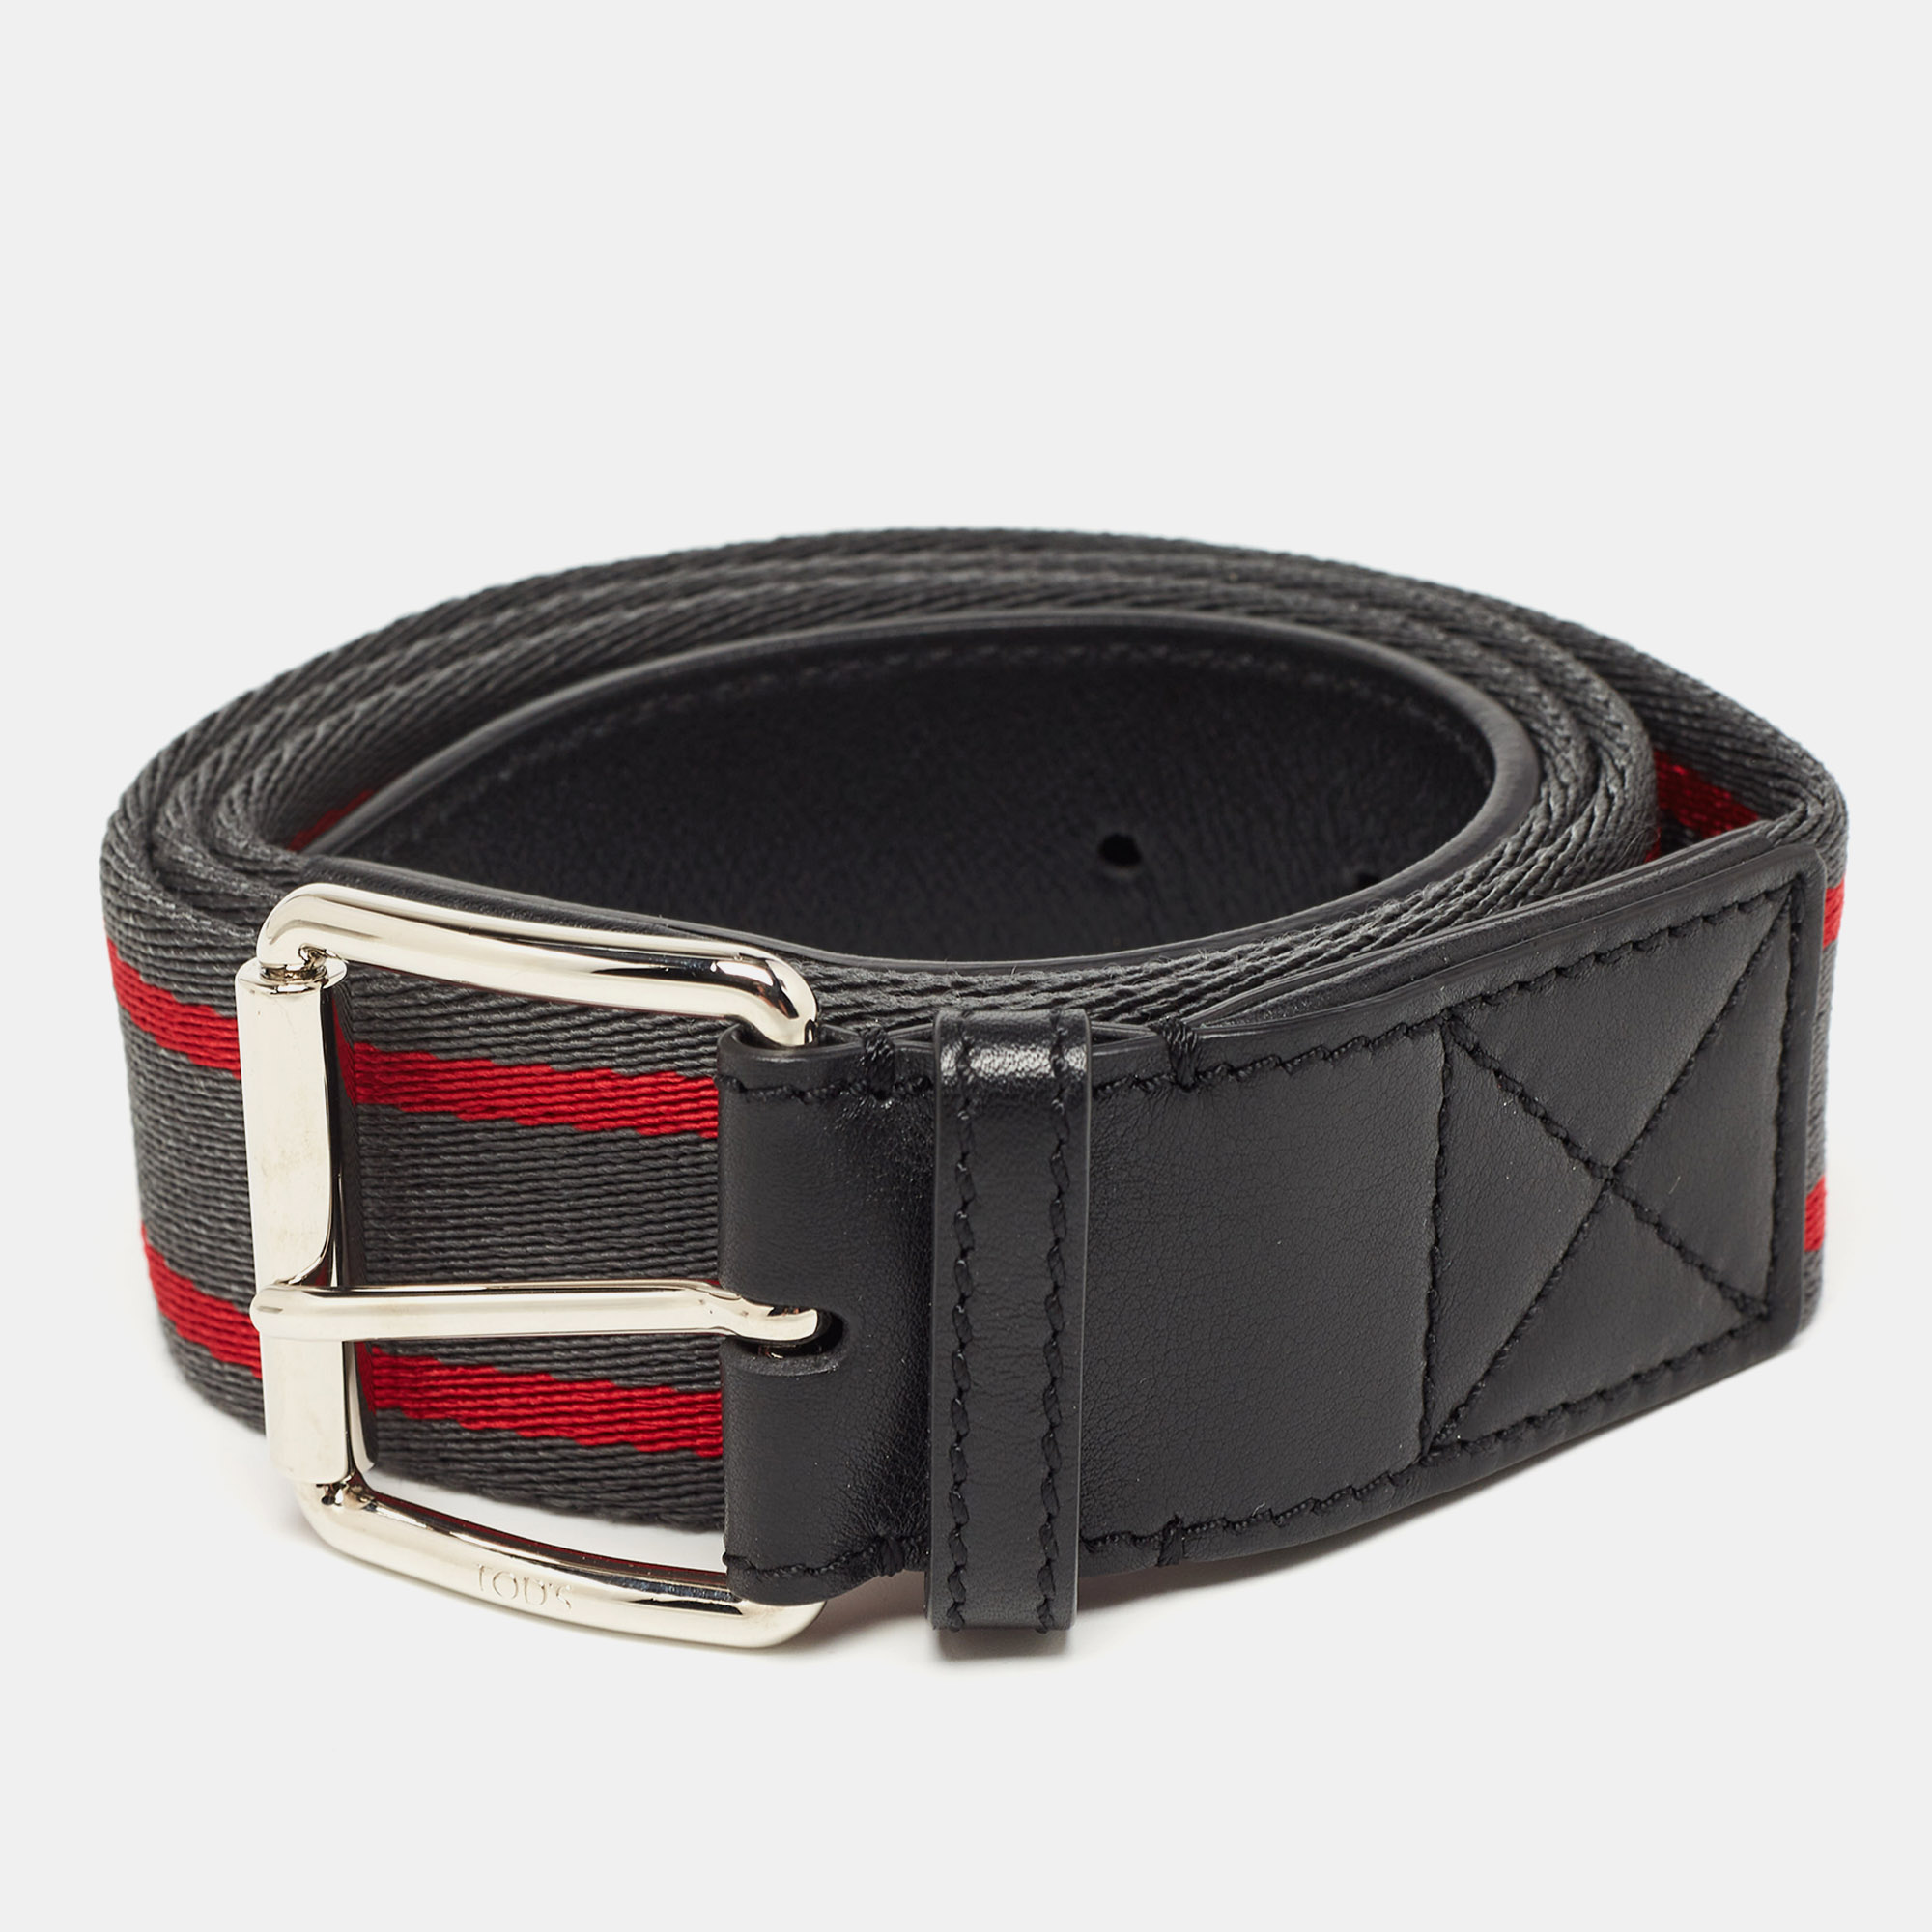 Tod's Dark Grey/Red Fabric And Leather Belt 105CM